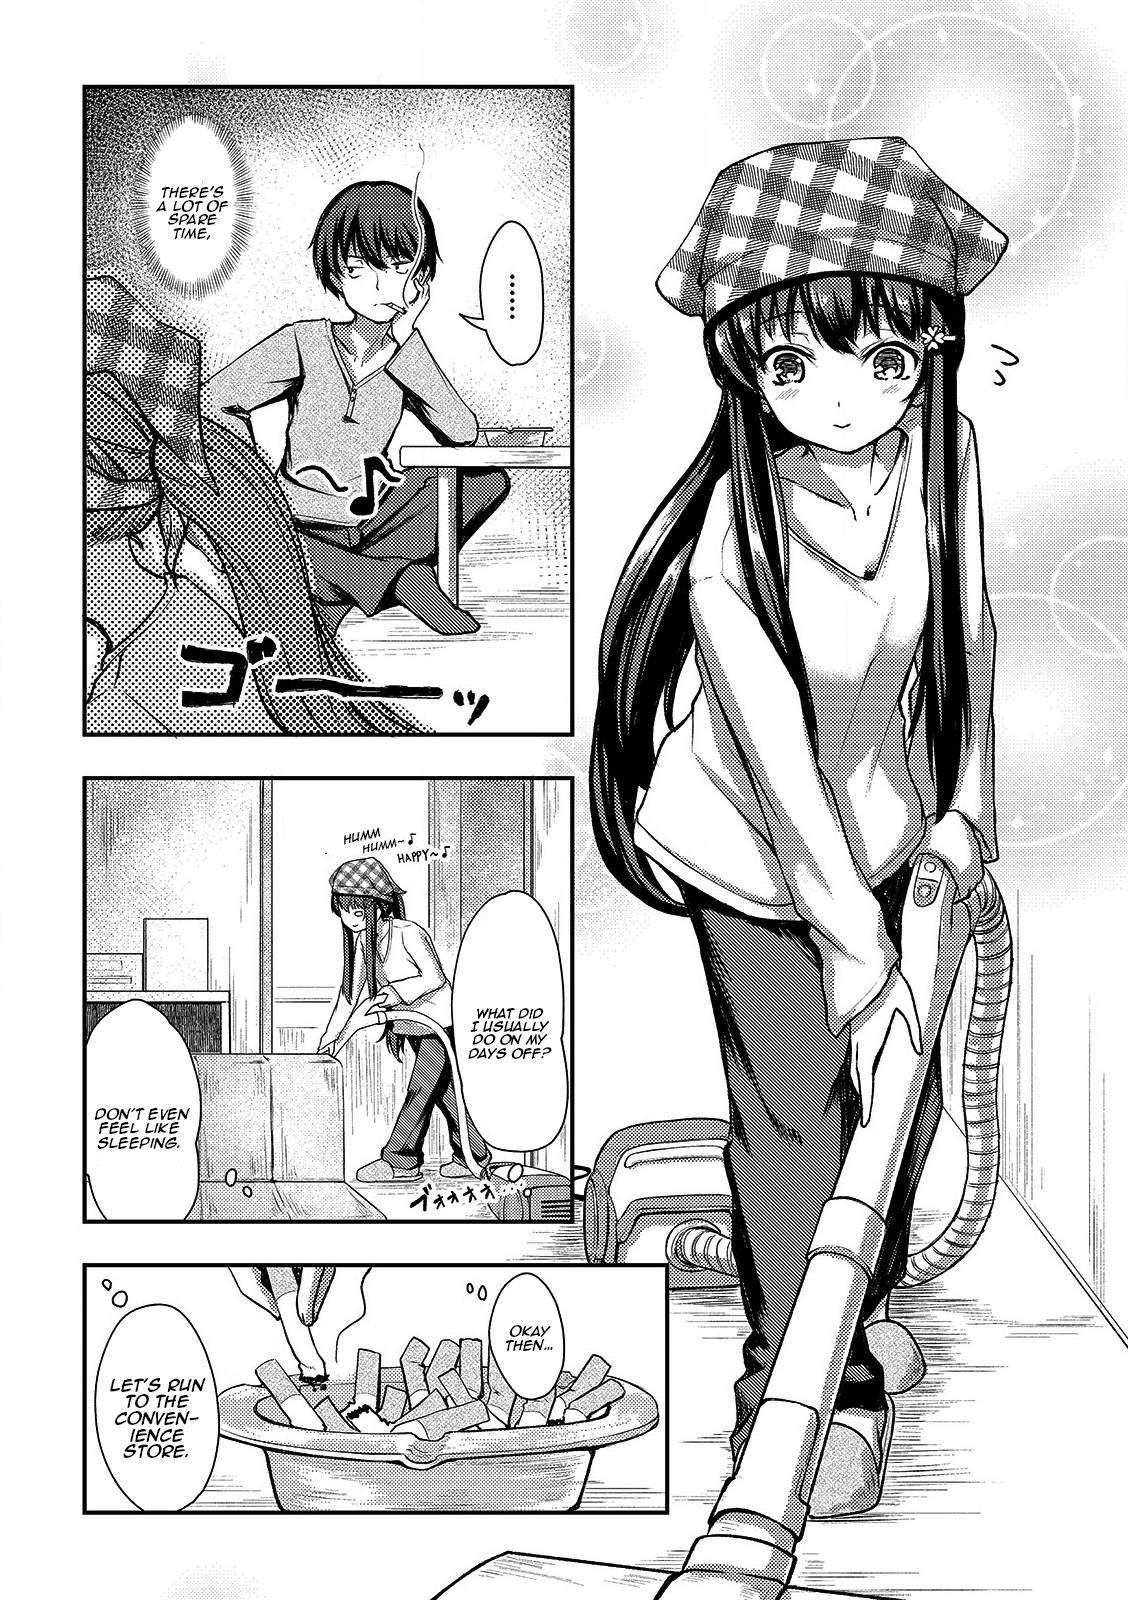 7 days with the troublesome future bride who is too kuudere - chapter 3 - #3